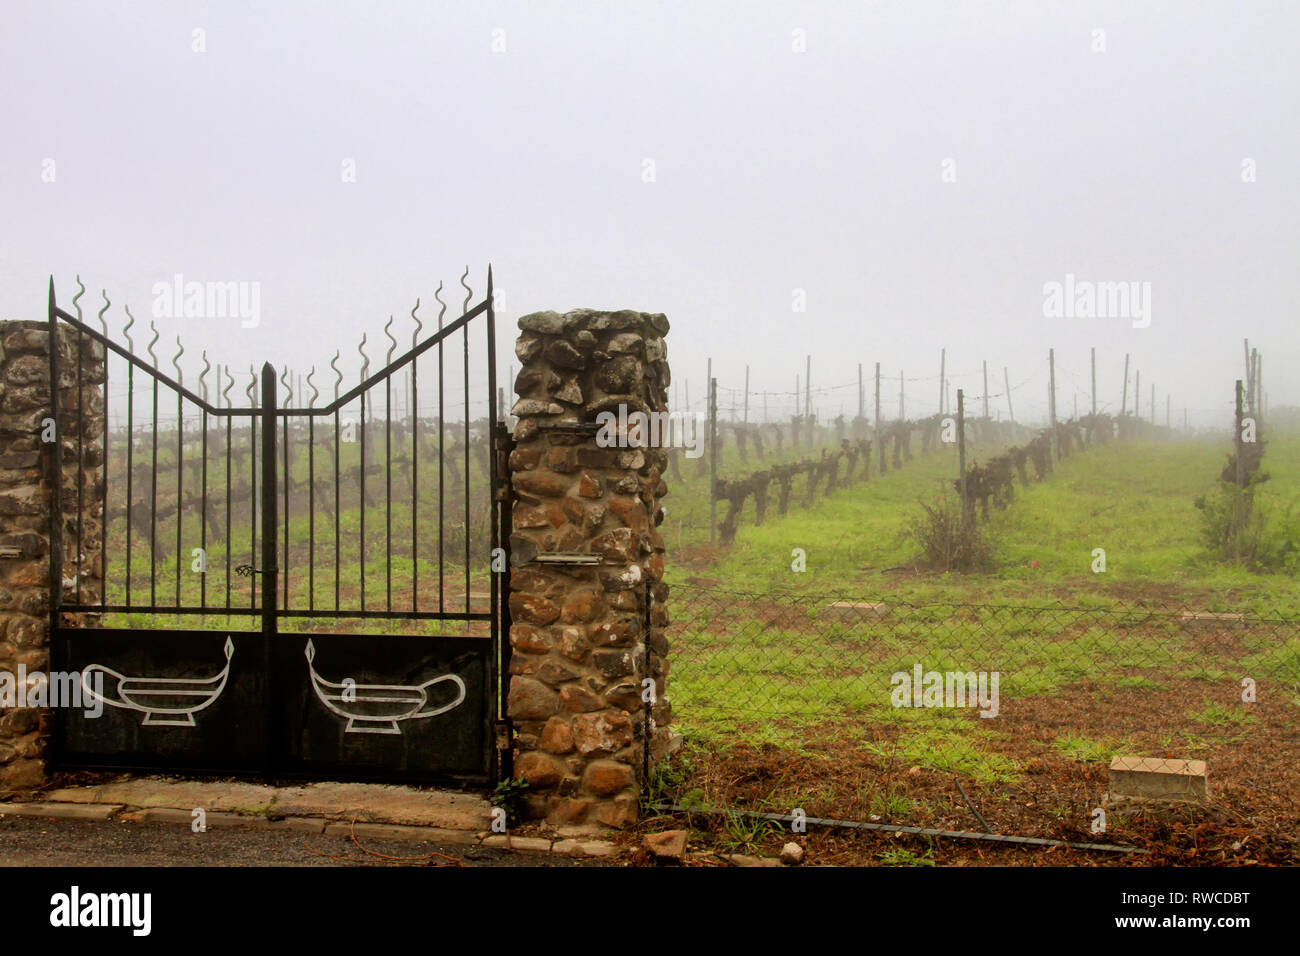 The gates to the vineyard at Golan Heights Winery in Katzrin Israel display the oil lamp logo of the winery. Stock Photo